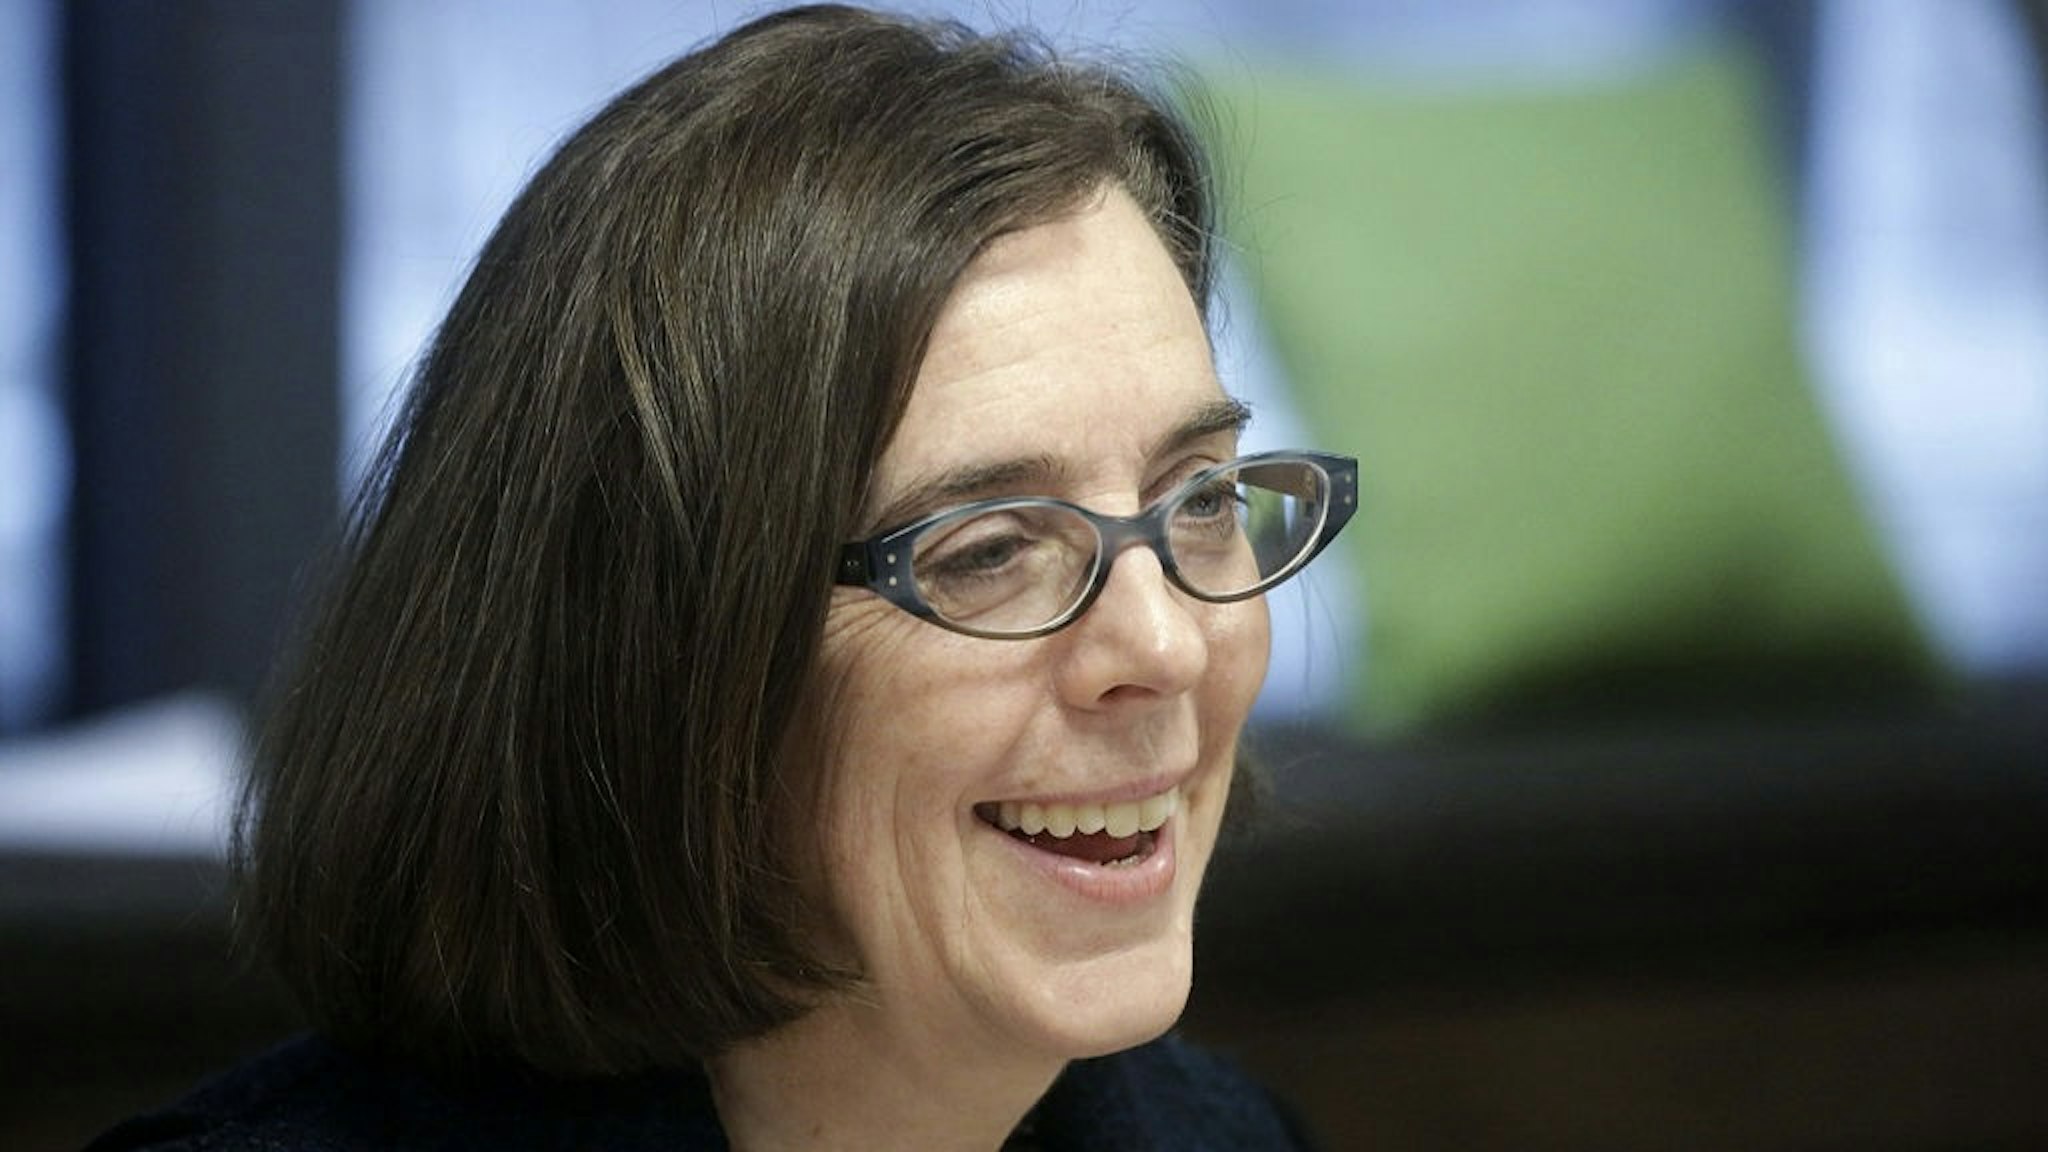 Oregon Governor Kate Brown Interview Kate Brown, governor of Oregon, smiles during an interview in Portland, Oregon, U.S. on Wednesday, Jan. 20, 2016. Brown, a Democrat, joined the state House of Representatives in 1991, was later elected to the Senate and served as secretary of state since 2009, before taking over as governor in February. Photographer: Meg Roussos/Bloomberg via Getty Images Bloomberg / Contributor